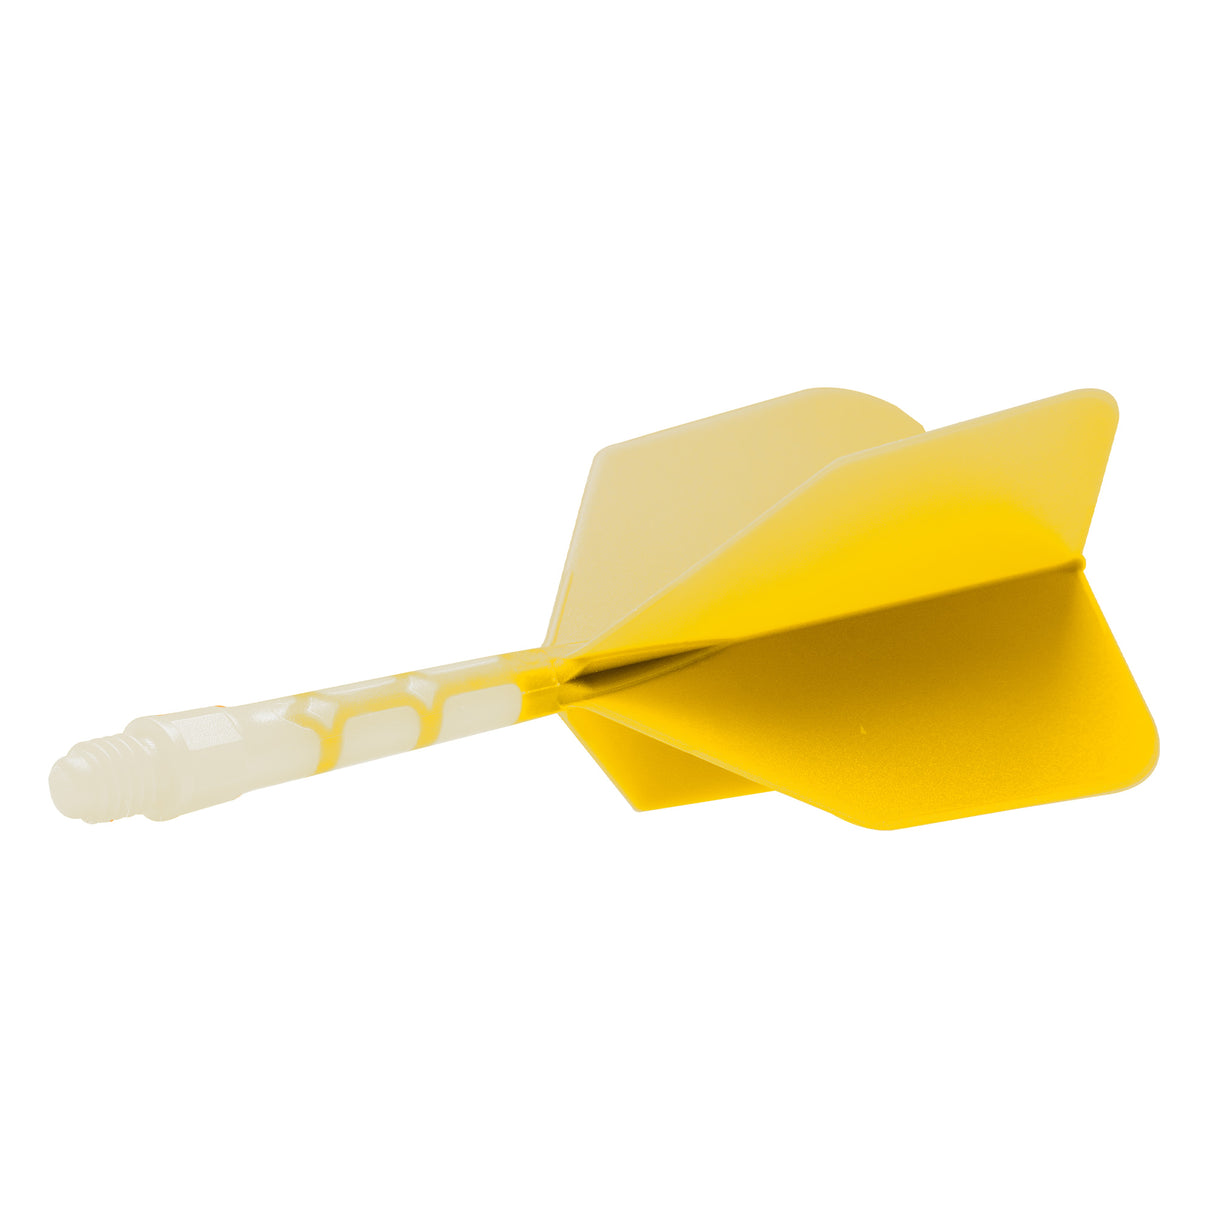 Cuesoul Rost T19 Integrated Dart Shaft and Flights - Big Wing - White with Yellow Flight